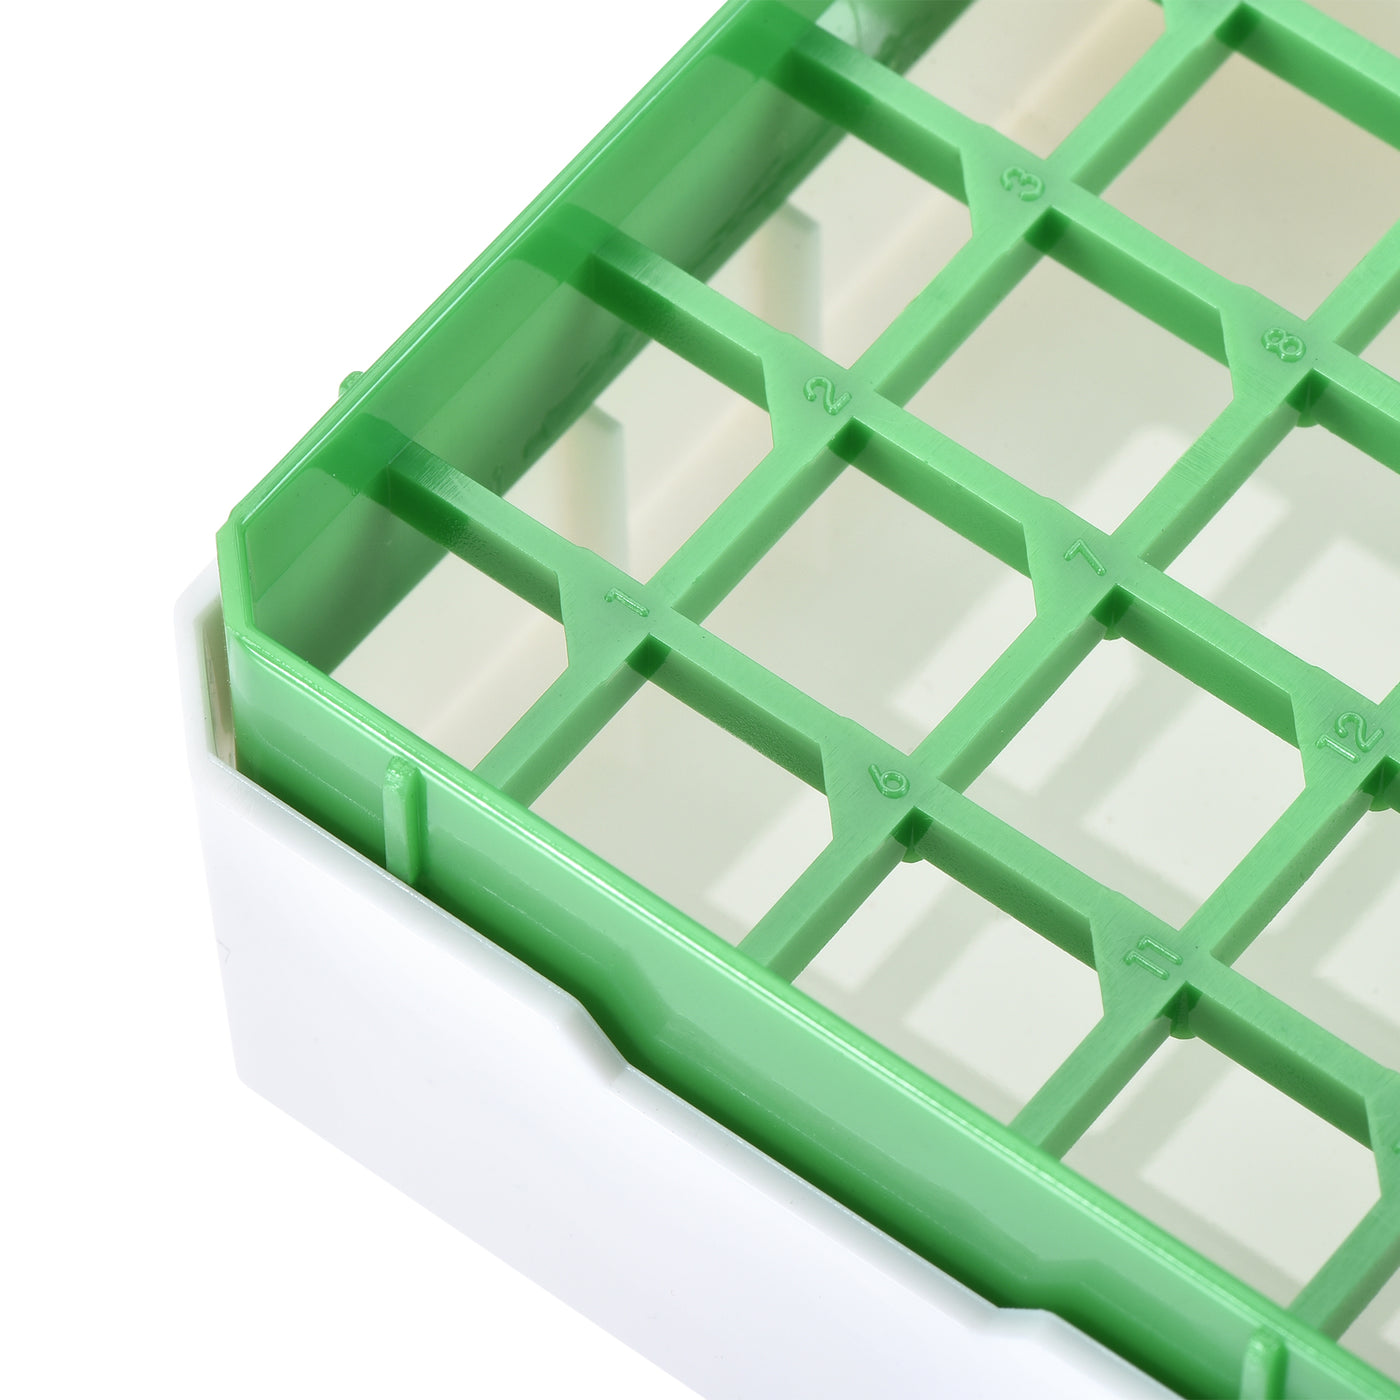 uxcell Uxcell Freezer Tube Box 25 Places Polypropylene Holder Rack for 1.8/2ml Microcentrifuge Tubes, Green 4Pcs